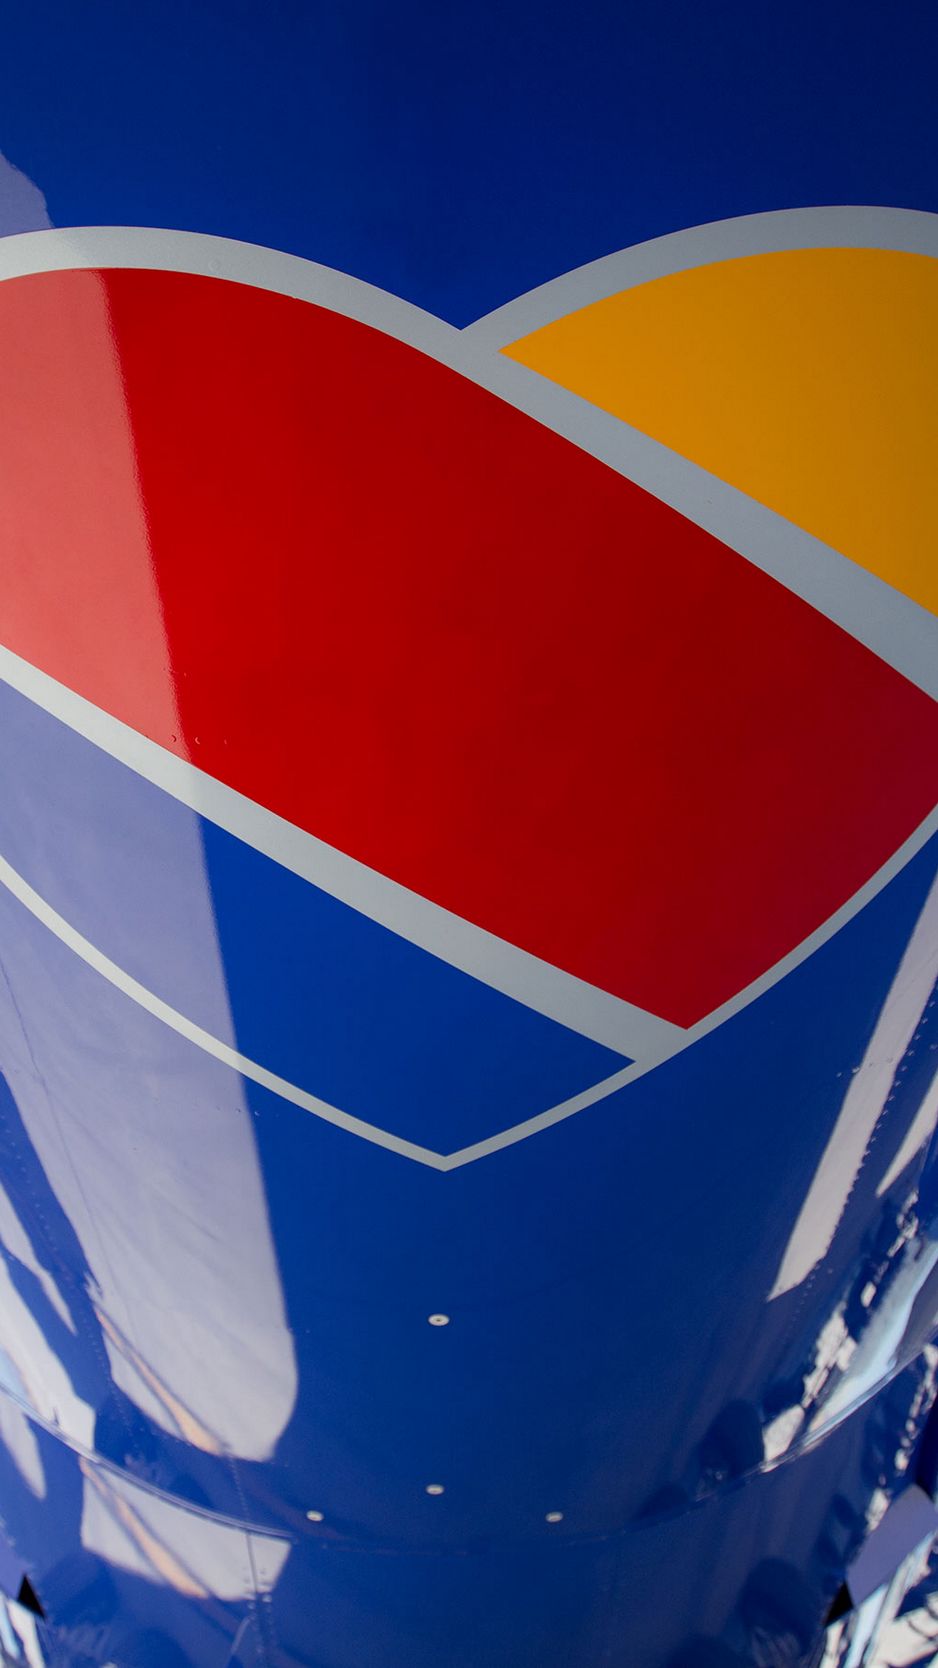 southwest airlines reveals new aircraft livery airport branding and logo   Southwest companion pass Southwest airlines Best travel credit cards